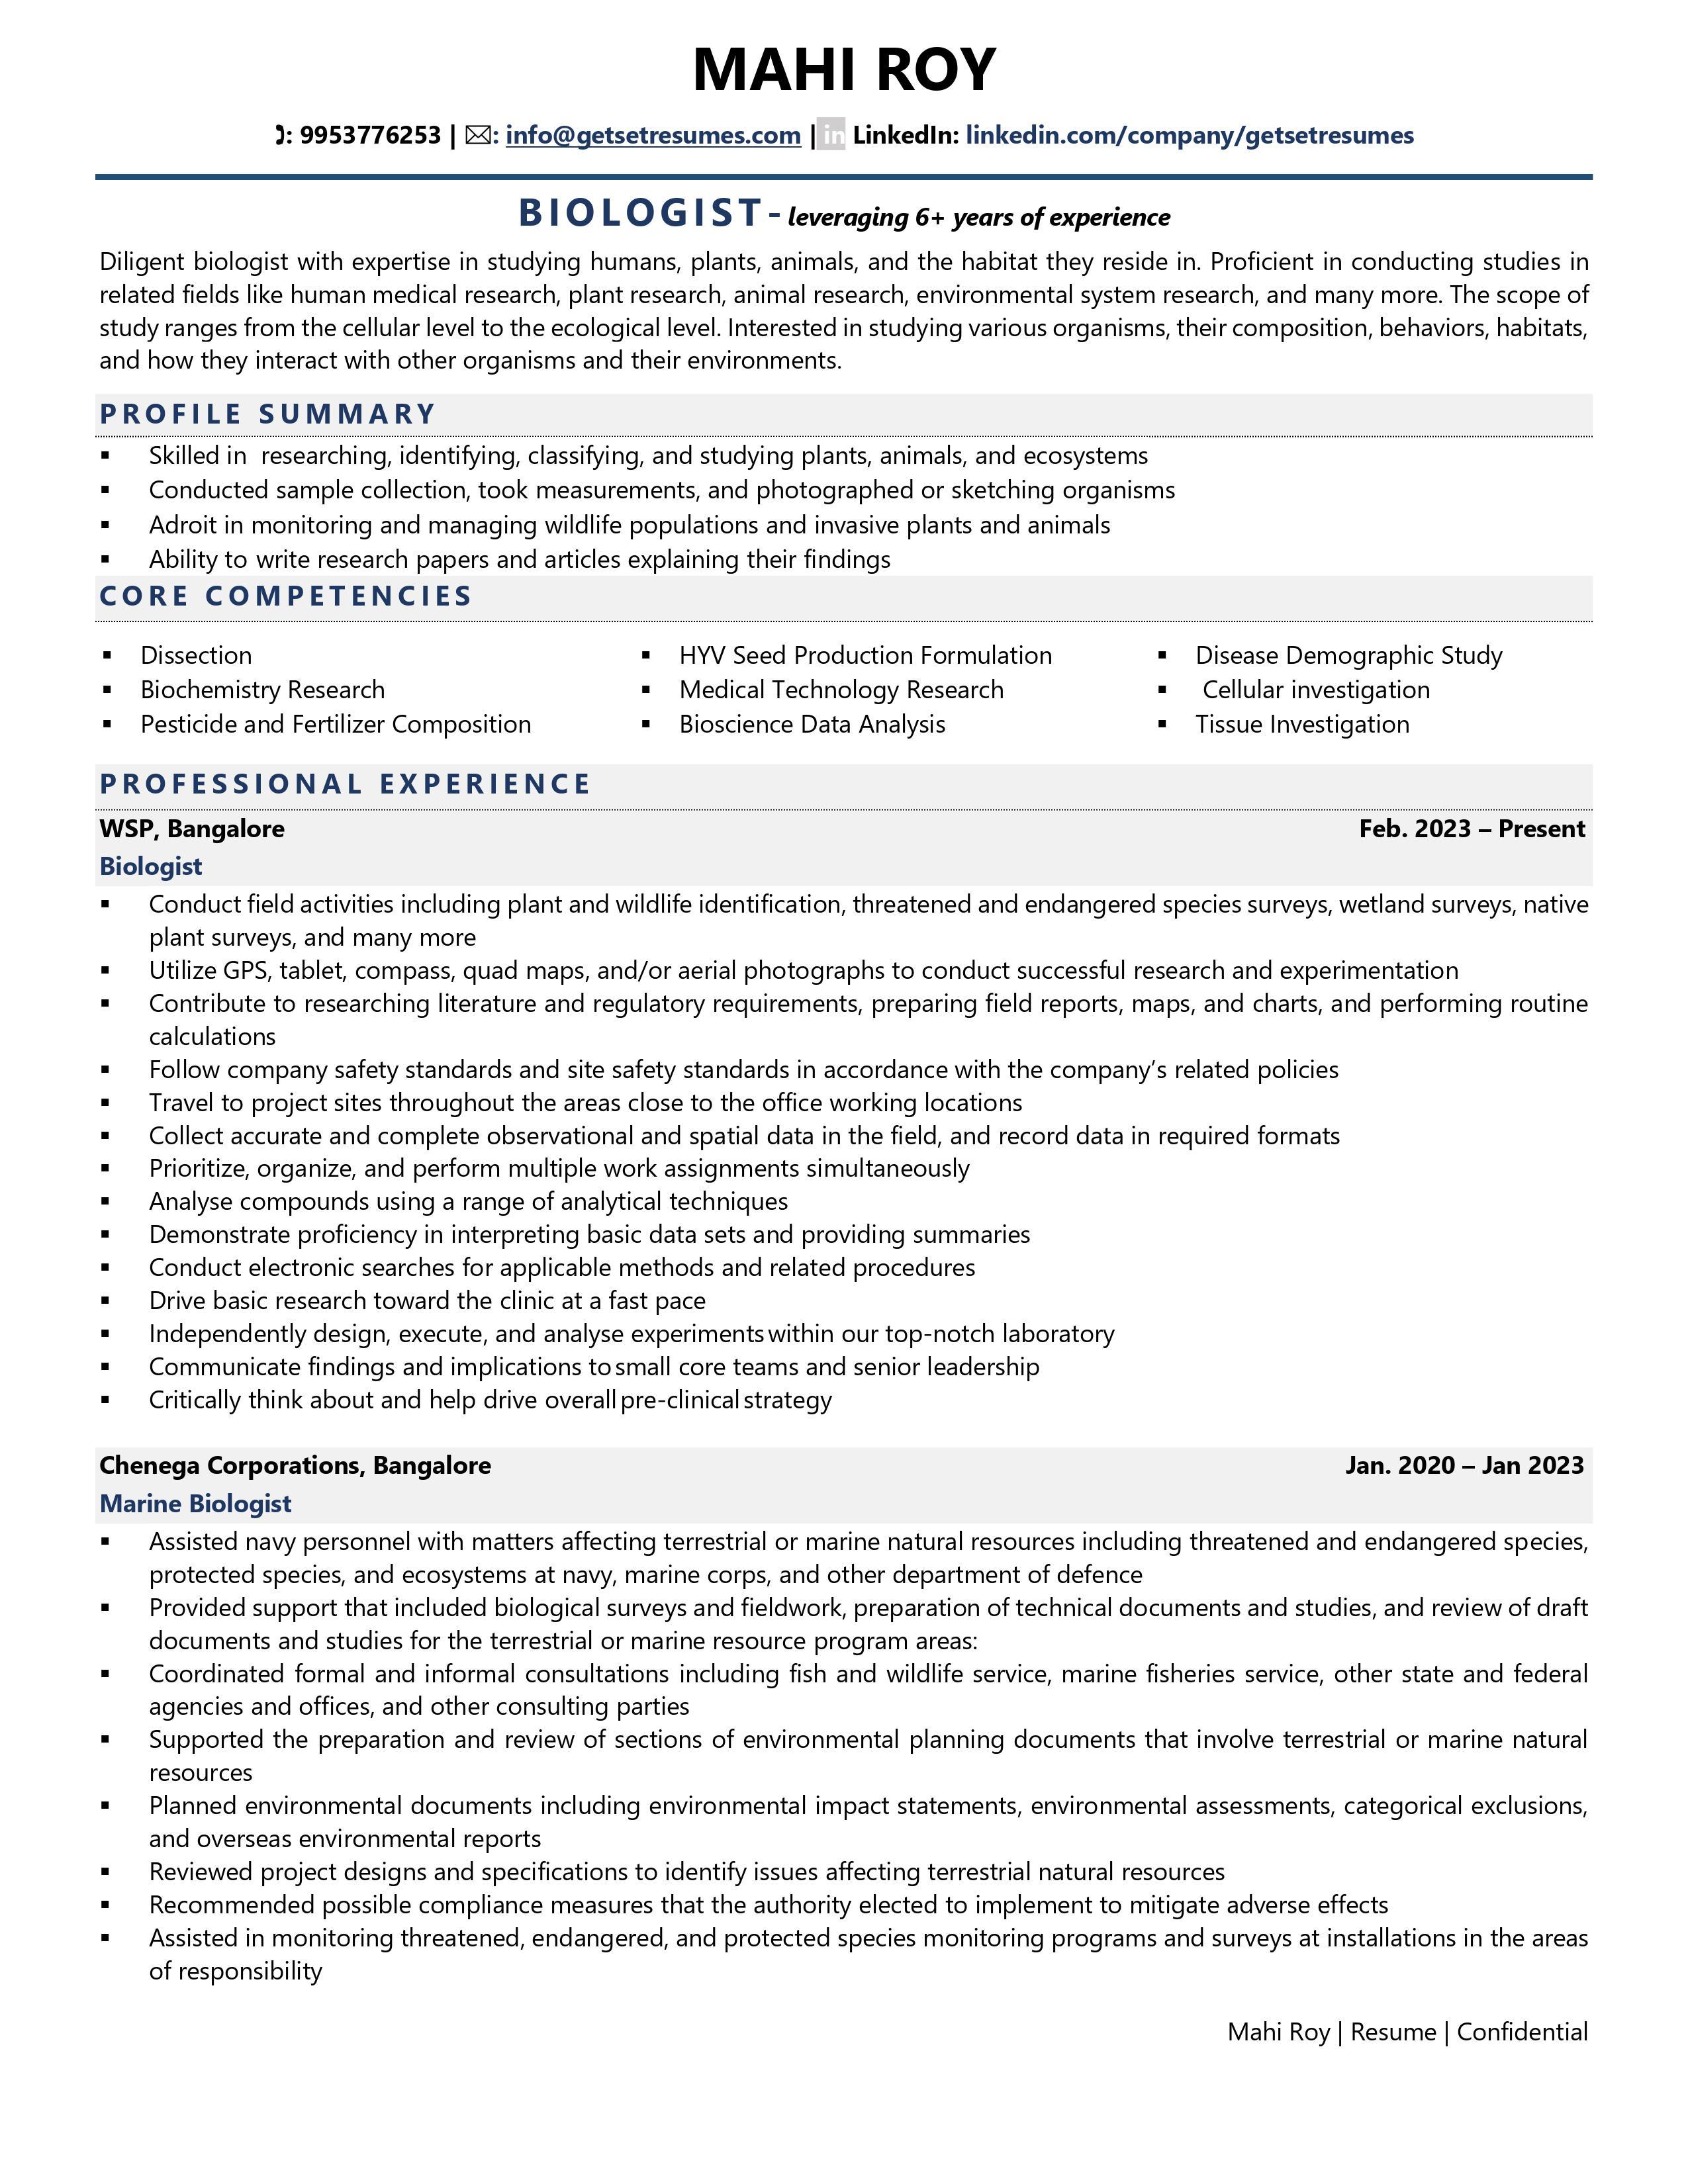 Biologist - Resume Example & Template